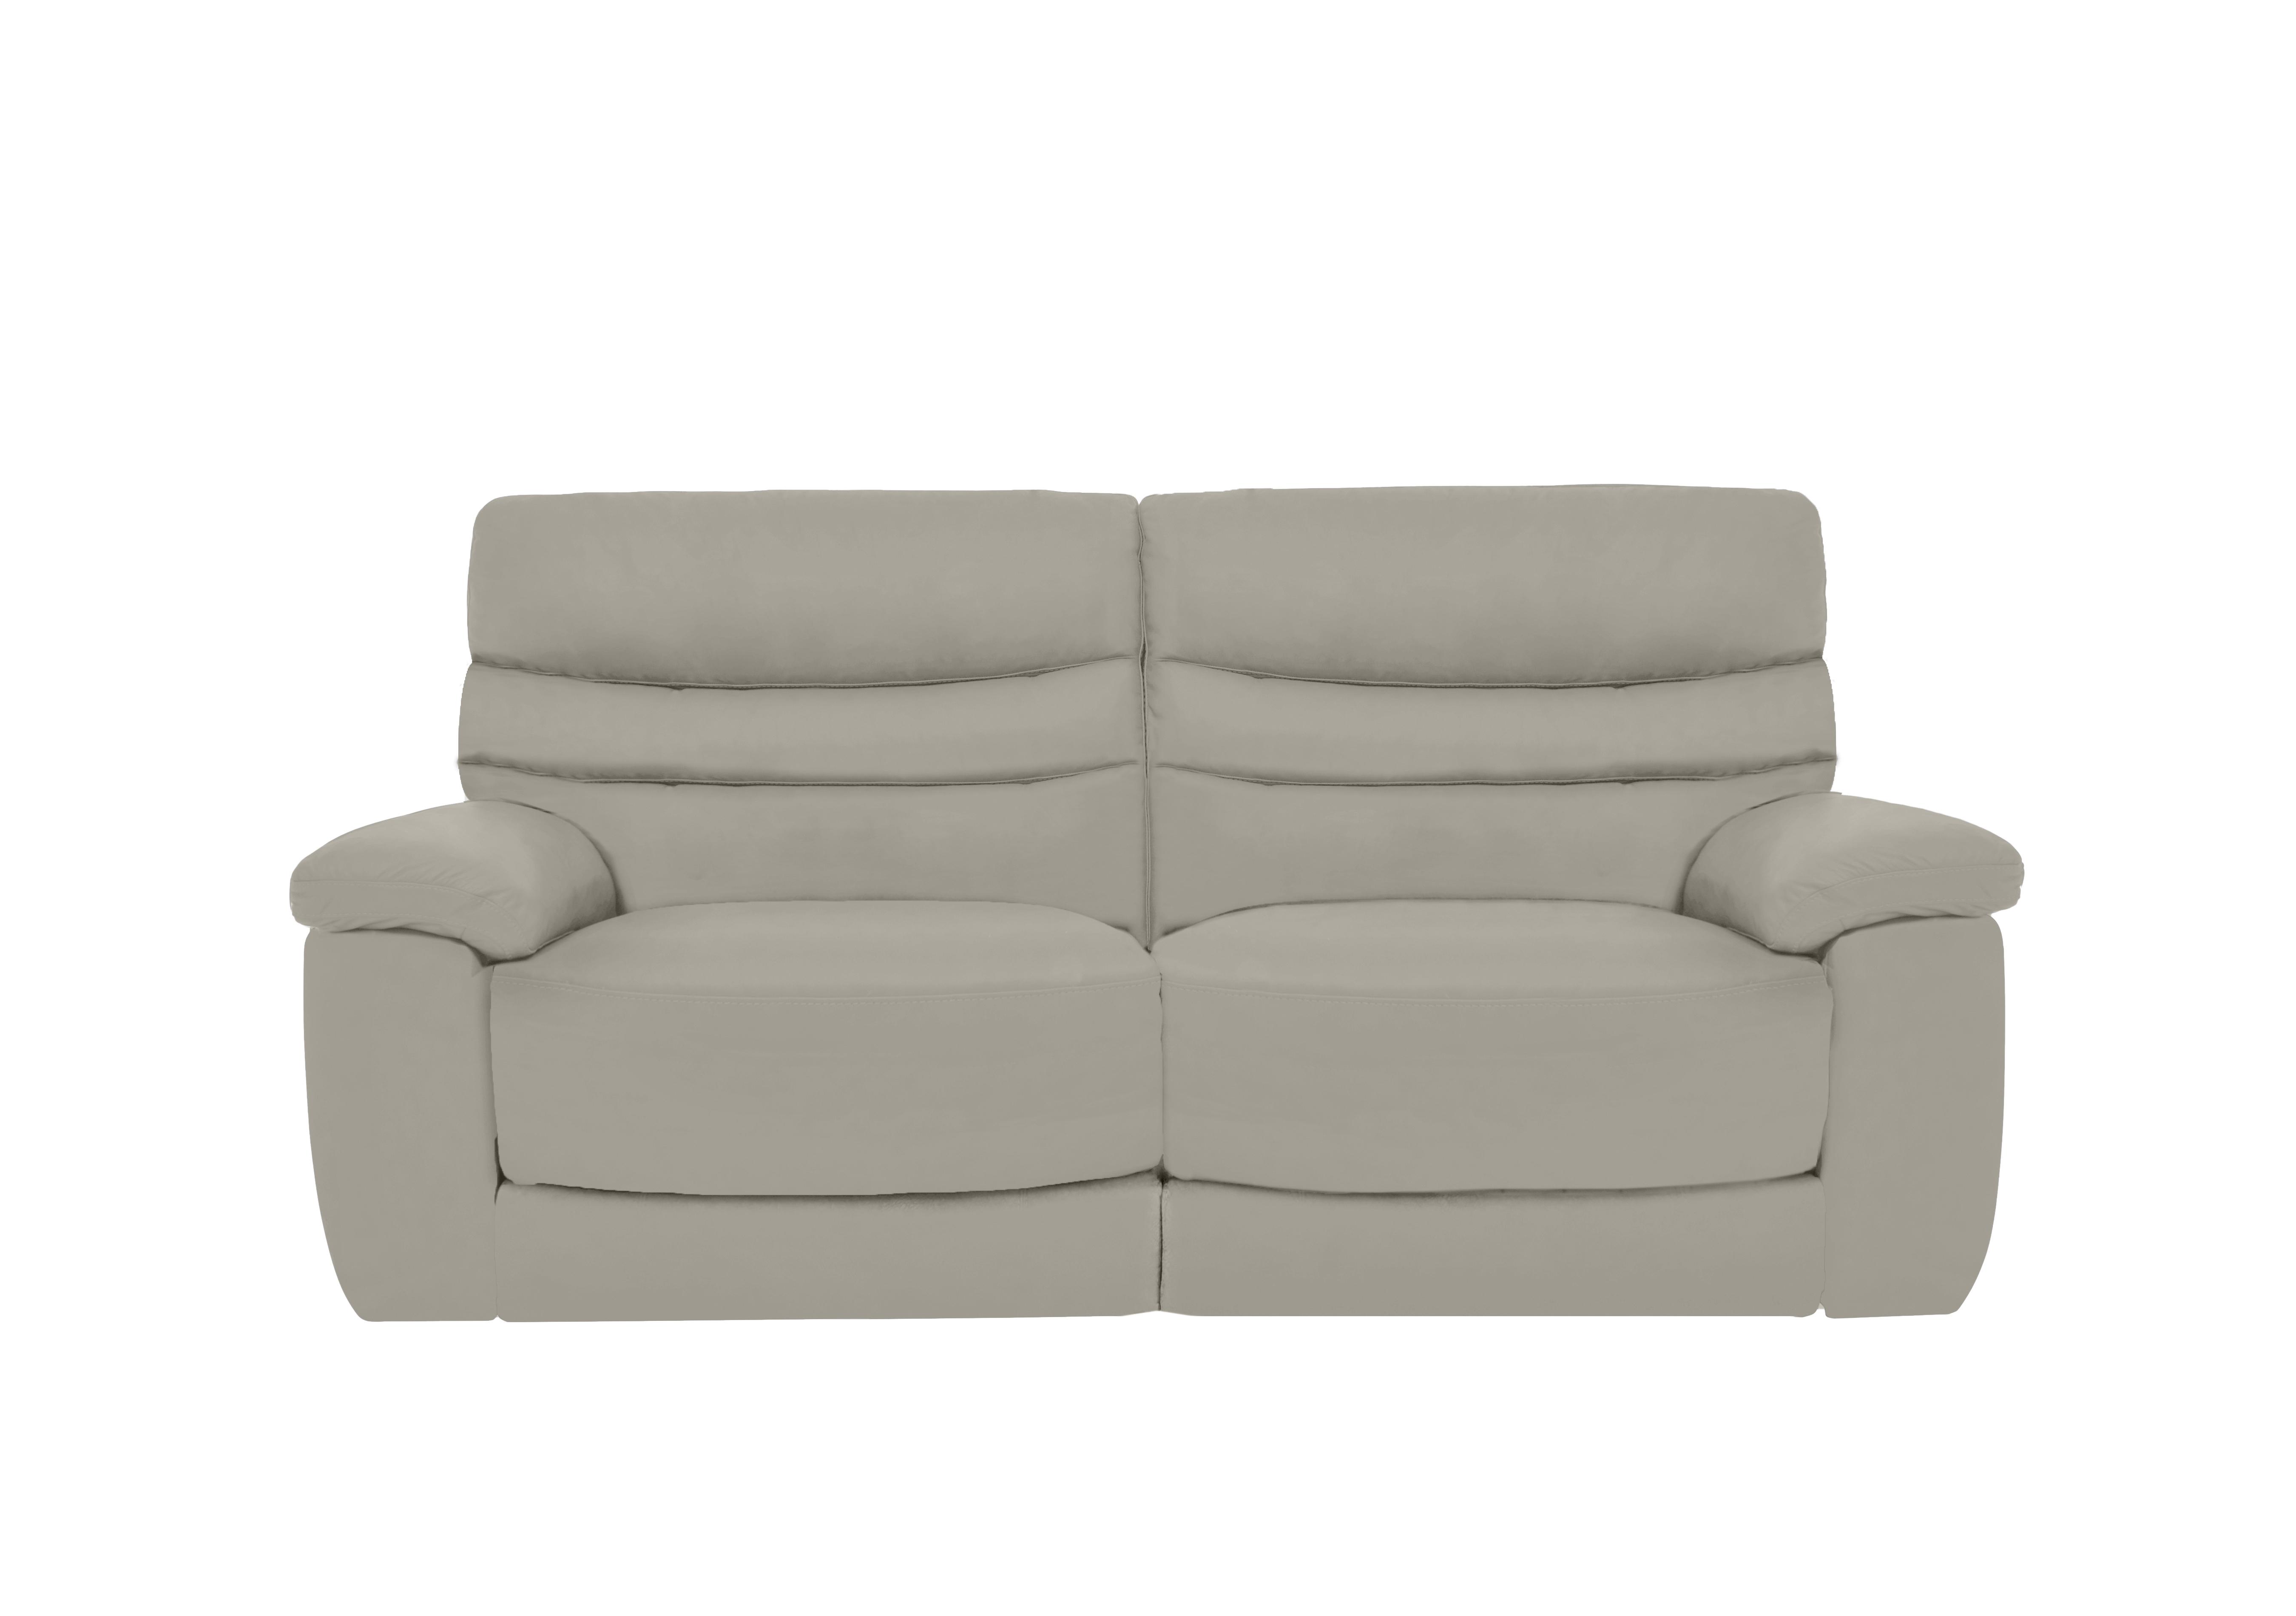 Nimbus 3 Seater Leather Power Recliner Sofa with Power Headrests and Power Lumbar in Bx-251e Grey on Furniture Village